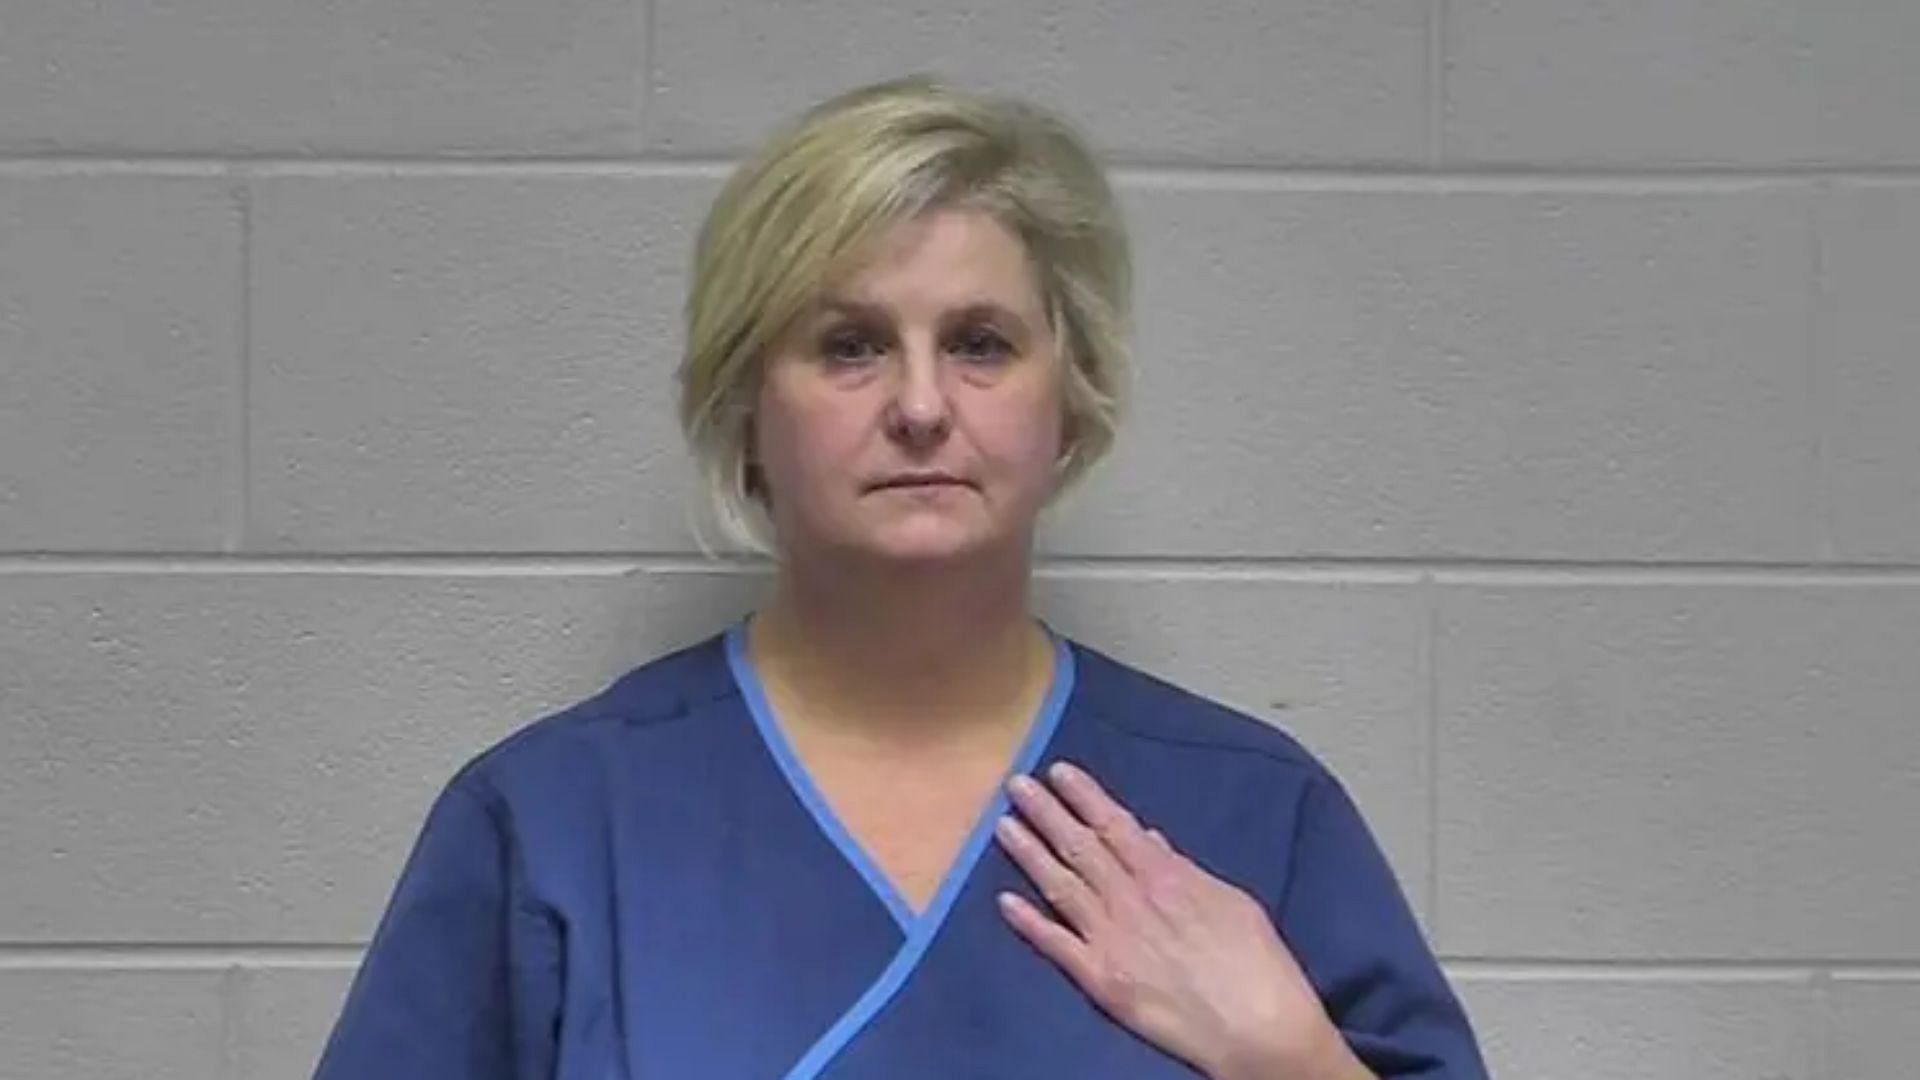 Dr. Stephanie Russell (Image via Oldham County Detention Center)